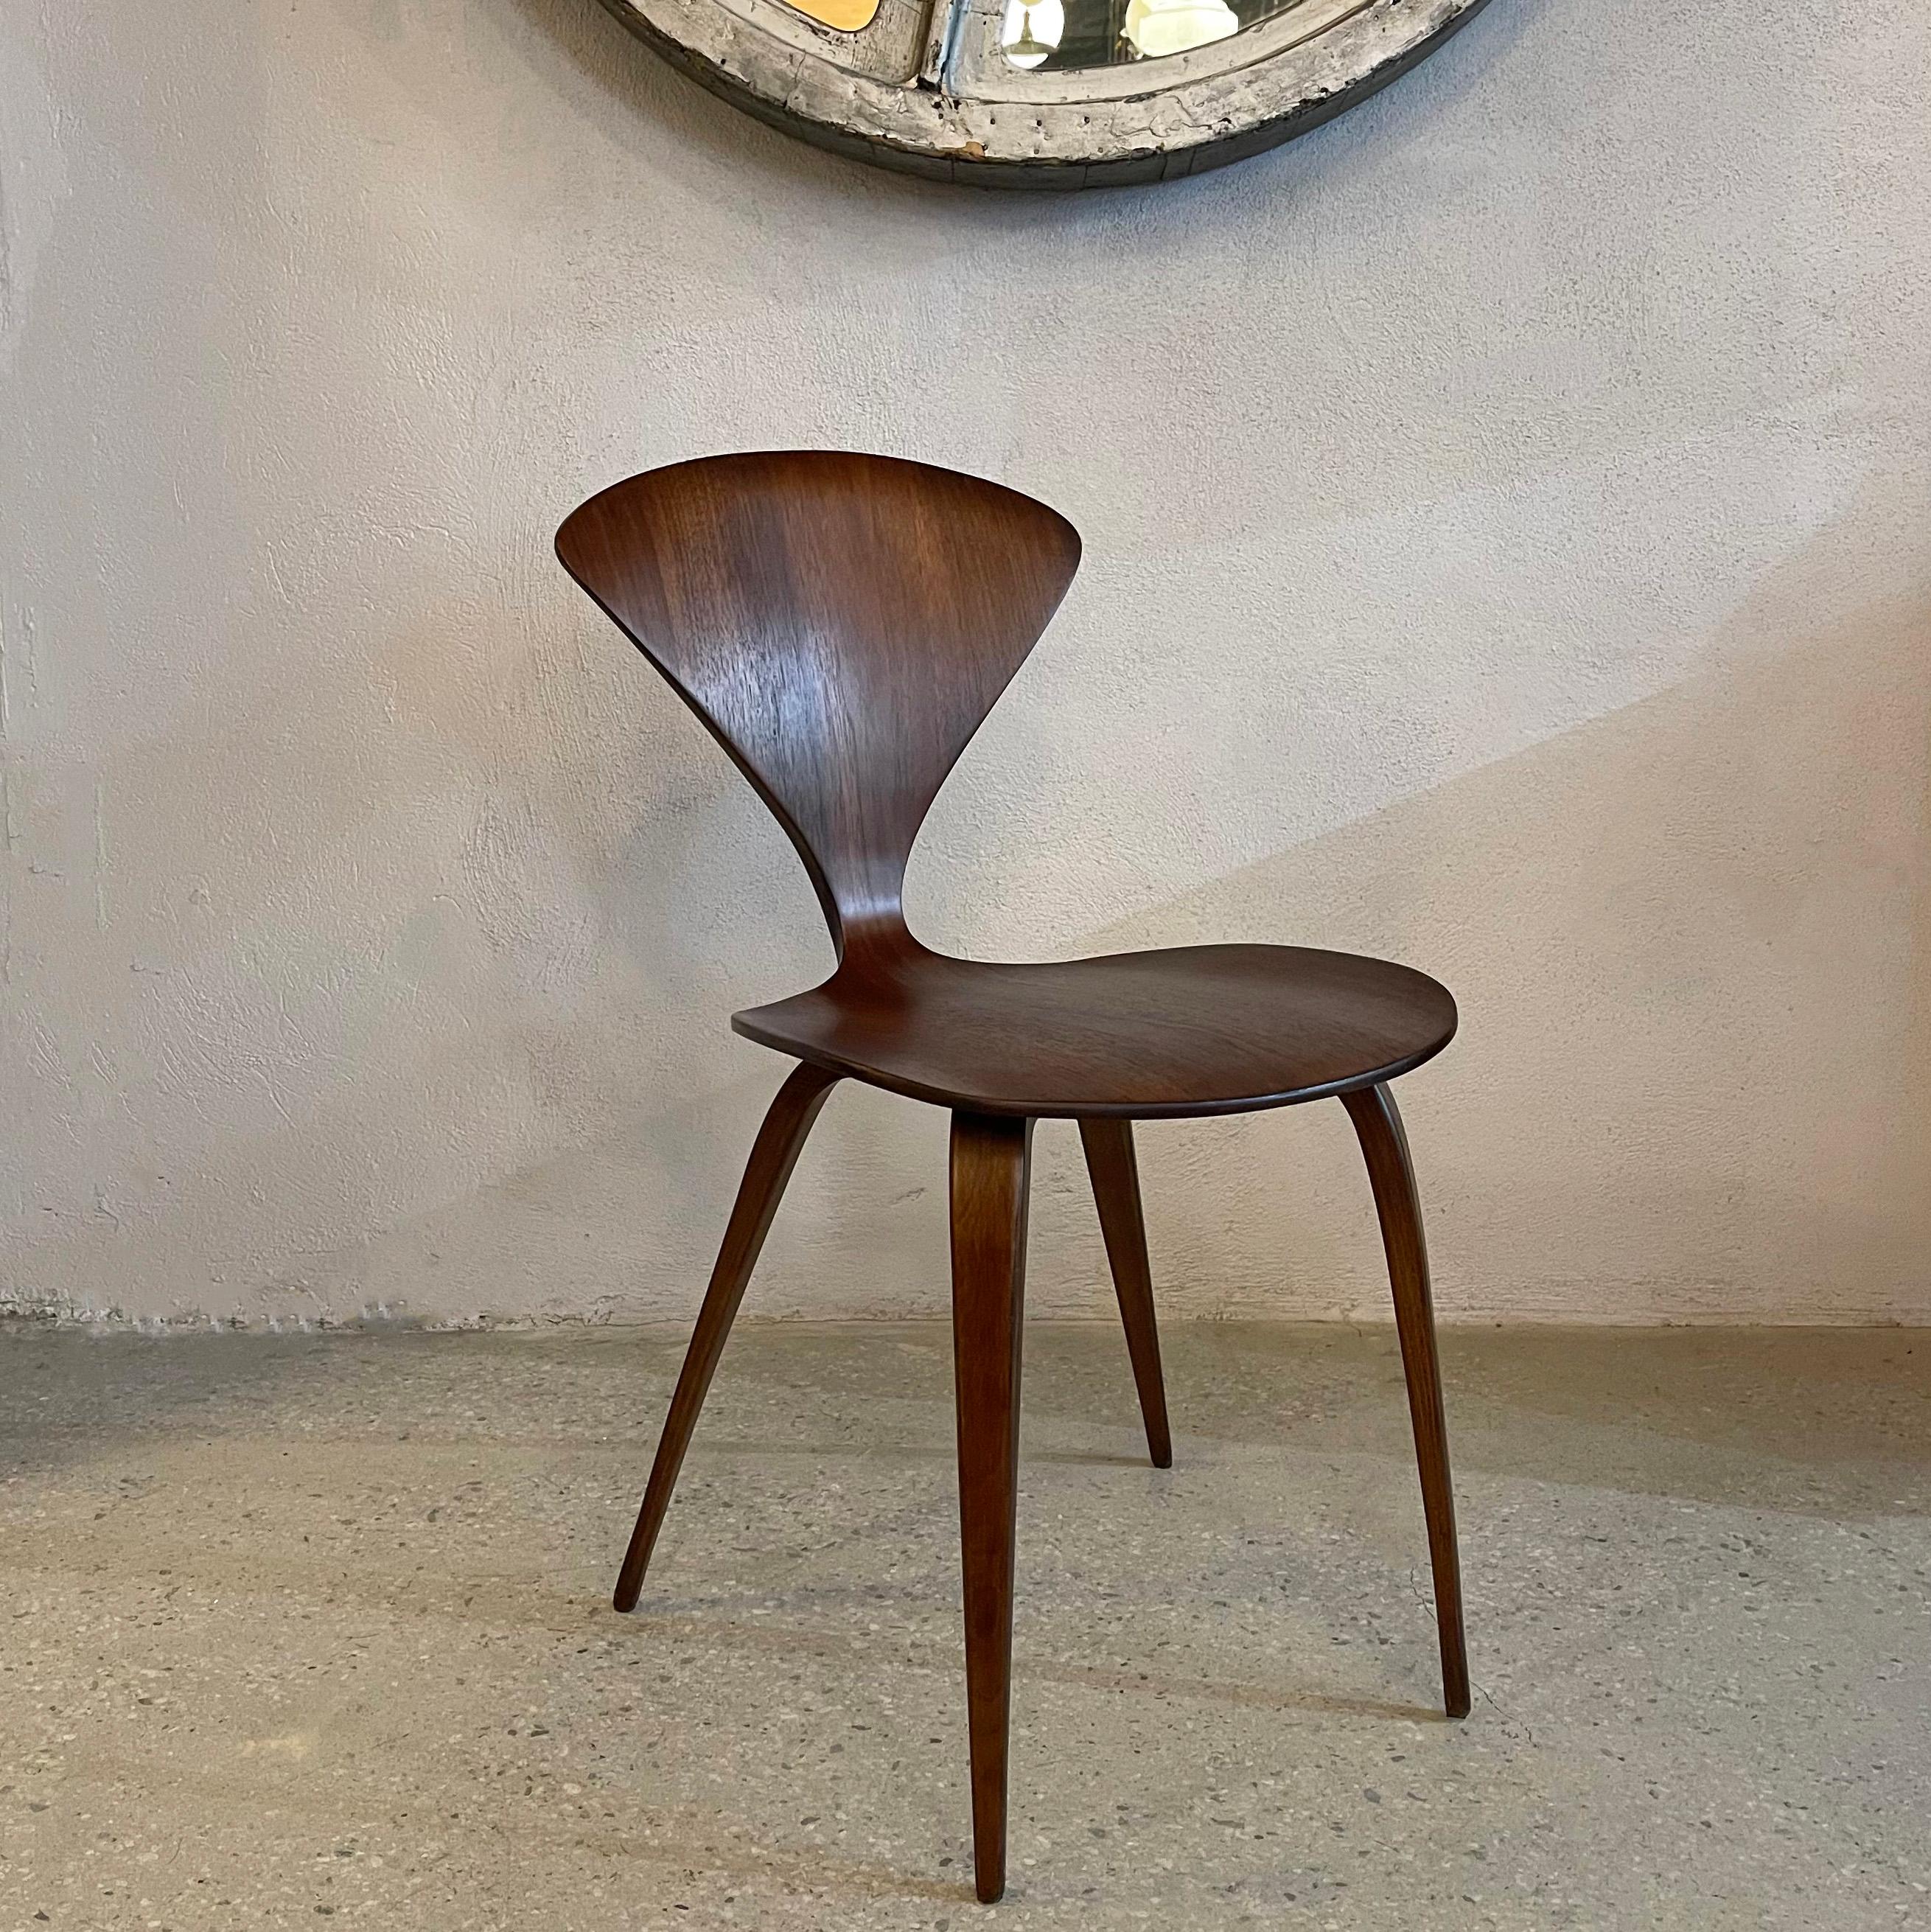 Mid-century modern, ply bentwood, side chair by Norman Cherner for Plycraft in a dark walnut finish. This iconic mid-century modern chair that is striking from every angle can be used as a side, desk or accent chair.